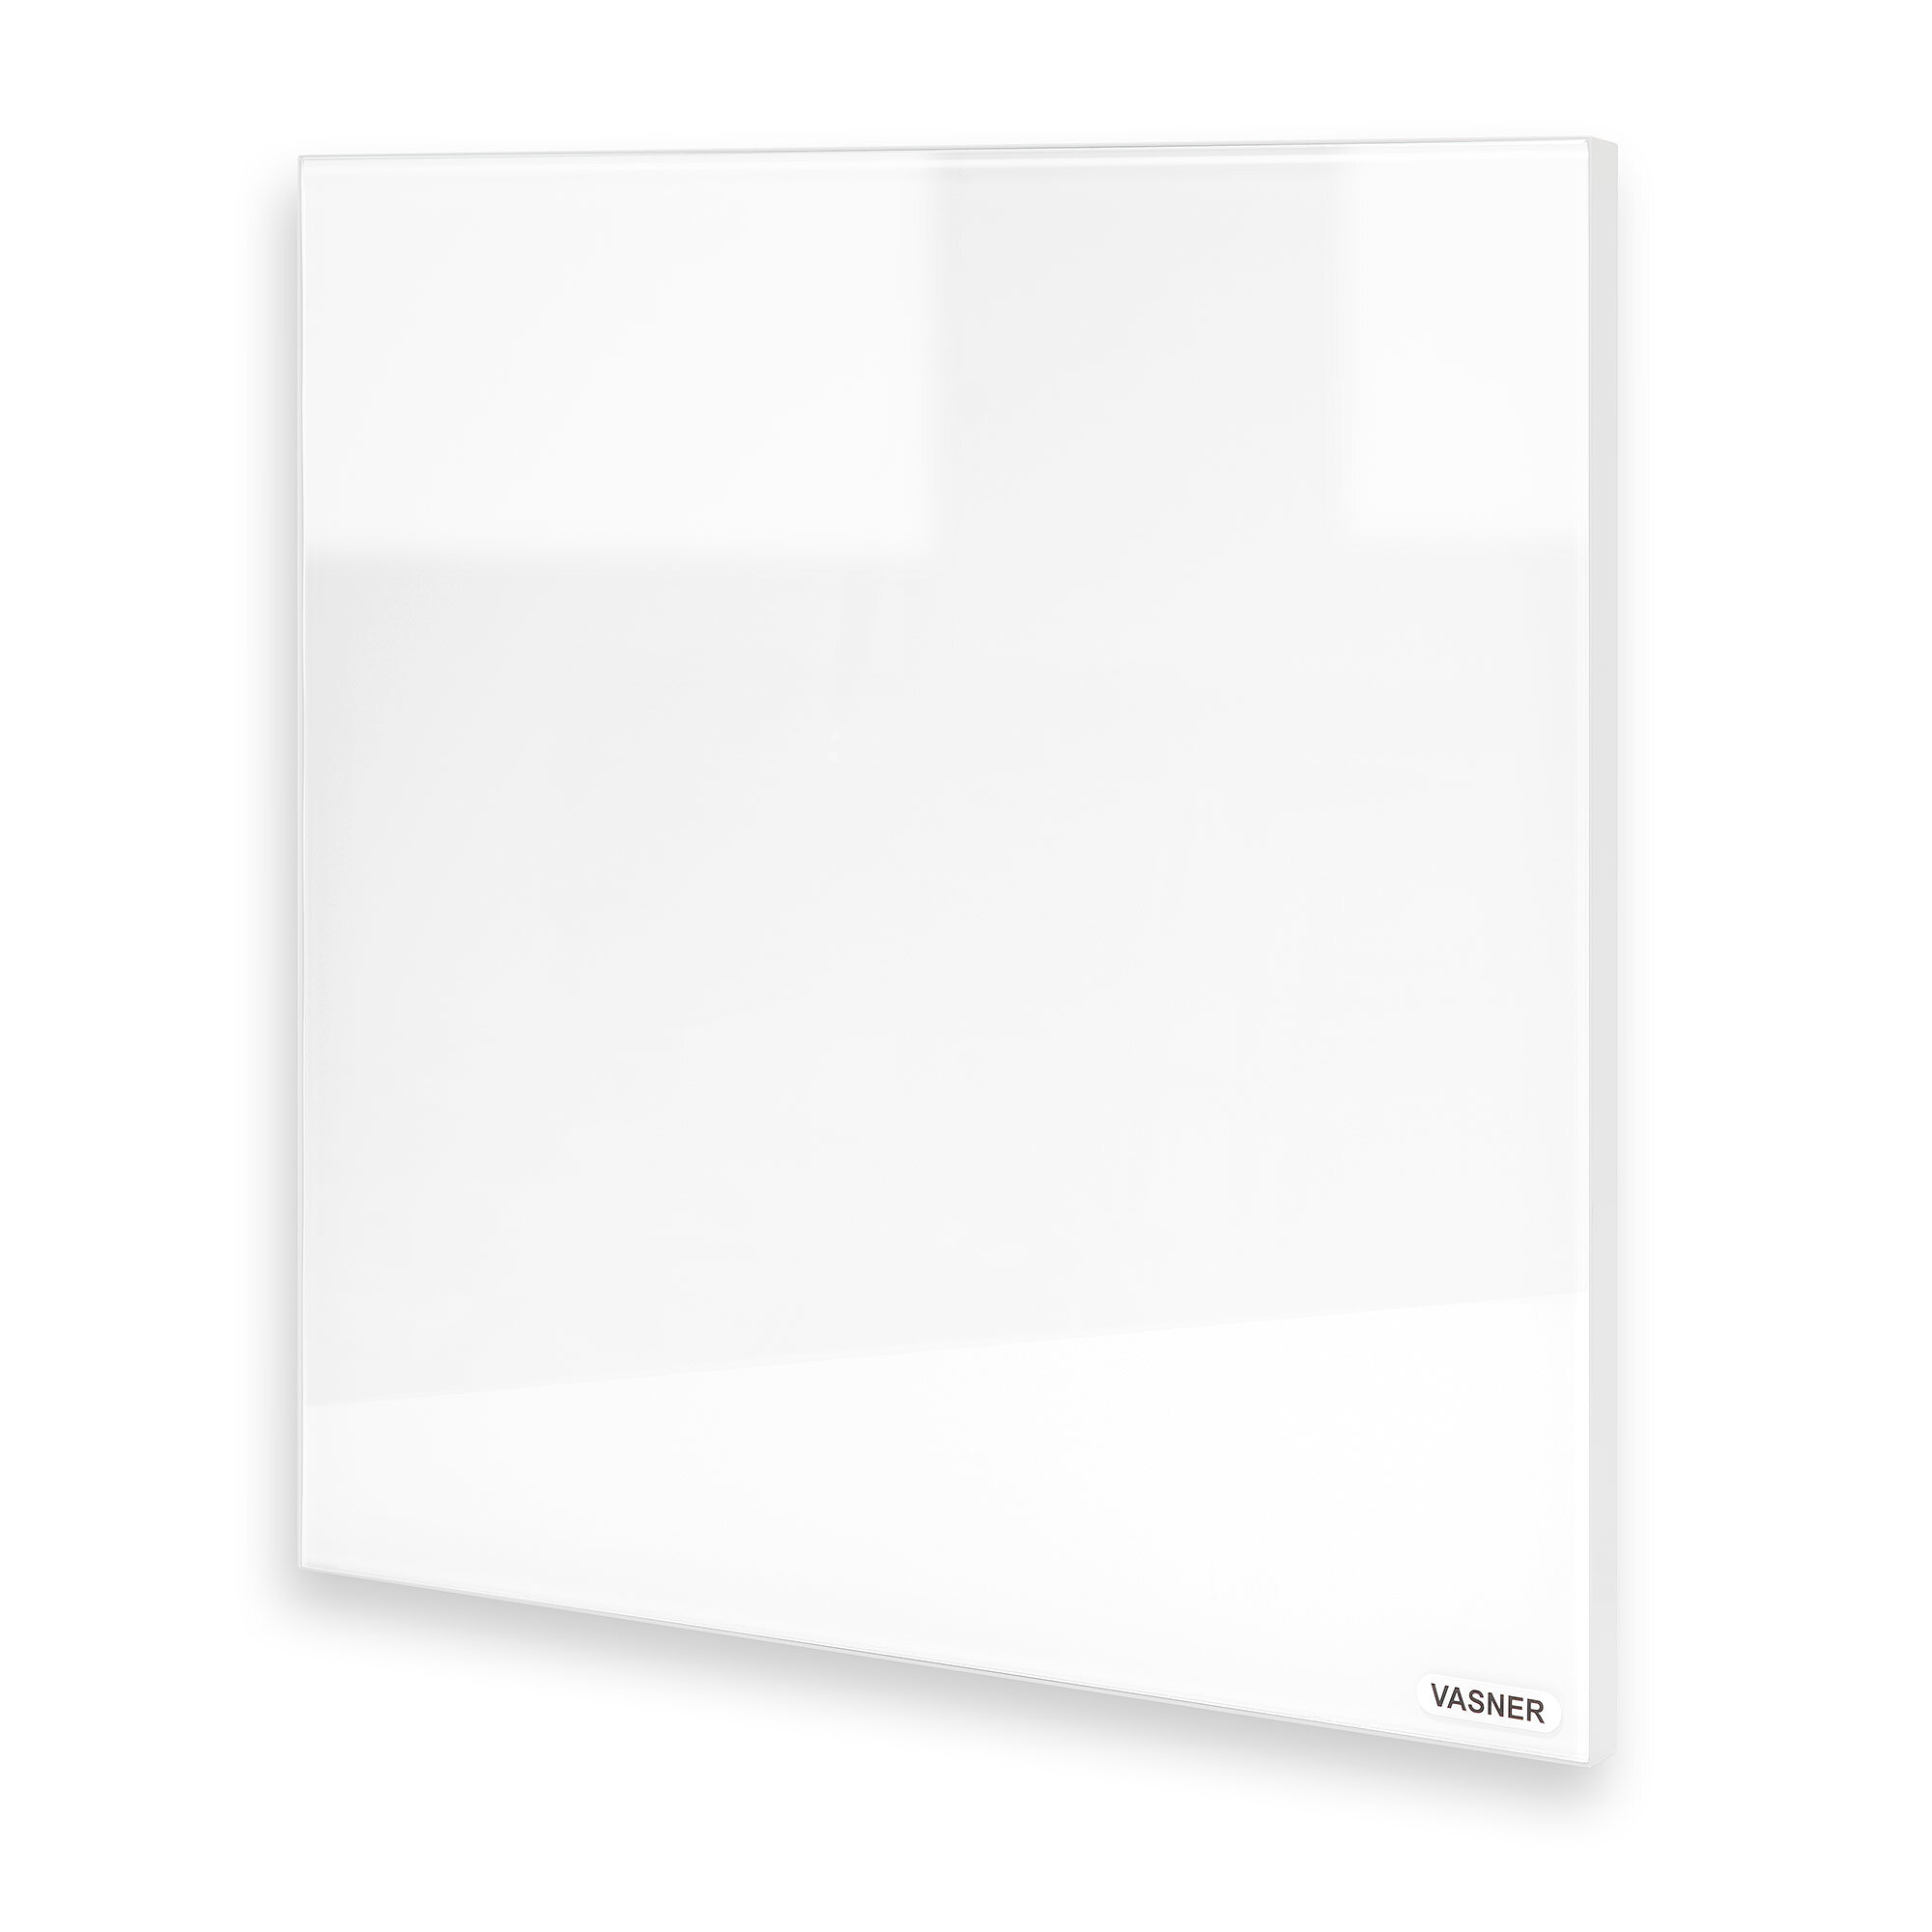 Infrared glass heating panel frameless appearance thanks to wafer-thin metal frame in white